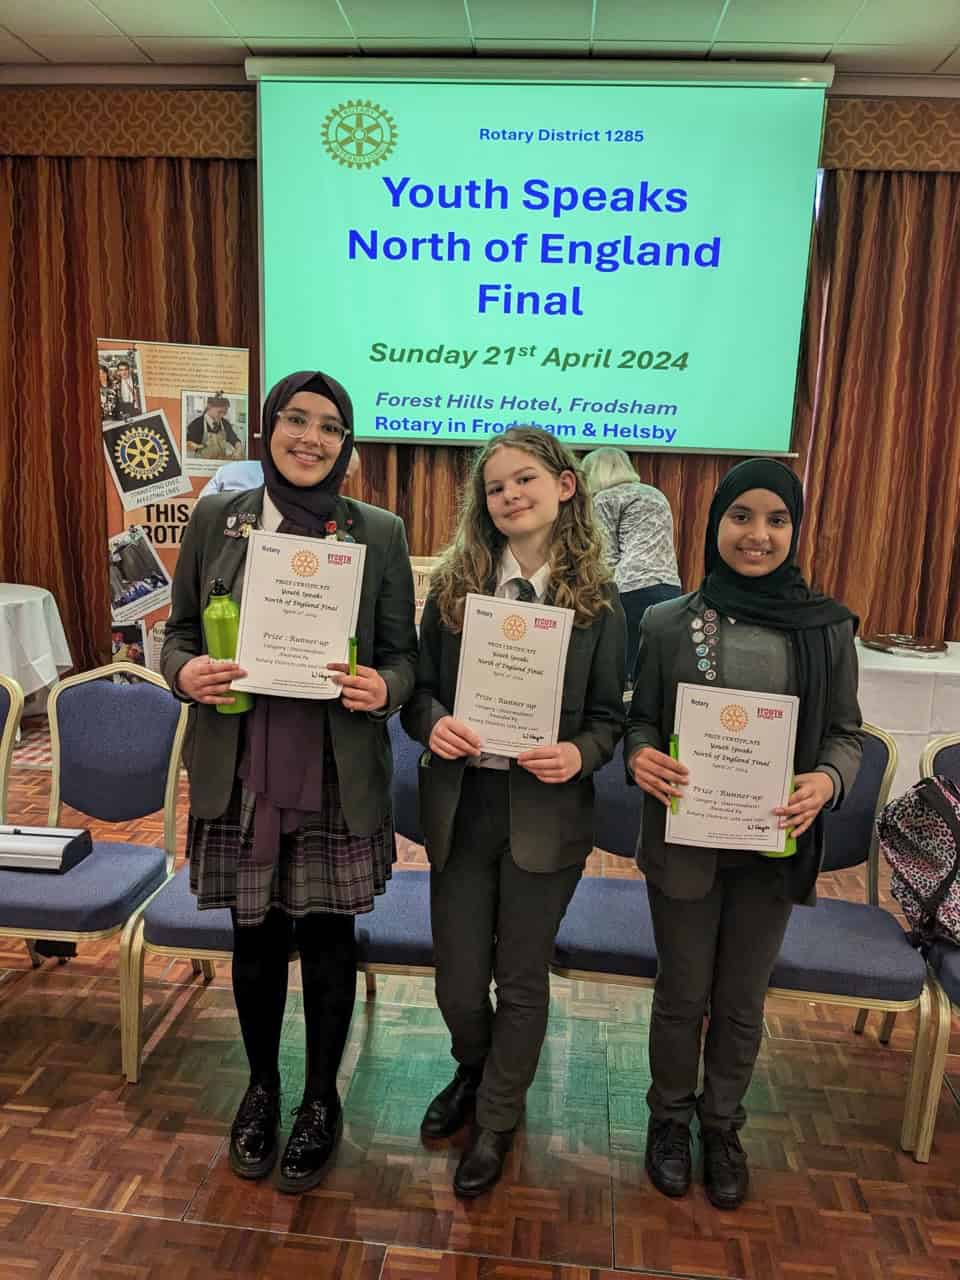  Three students from Laurus Cheadle Hulme smile as they hold their certificates which they received as the Intermediate Runners Up of the Rotary Youth Speaks North of England Final 2024.